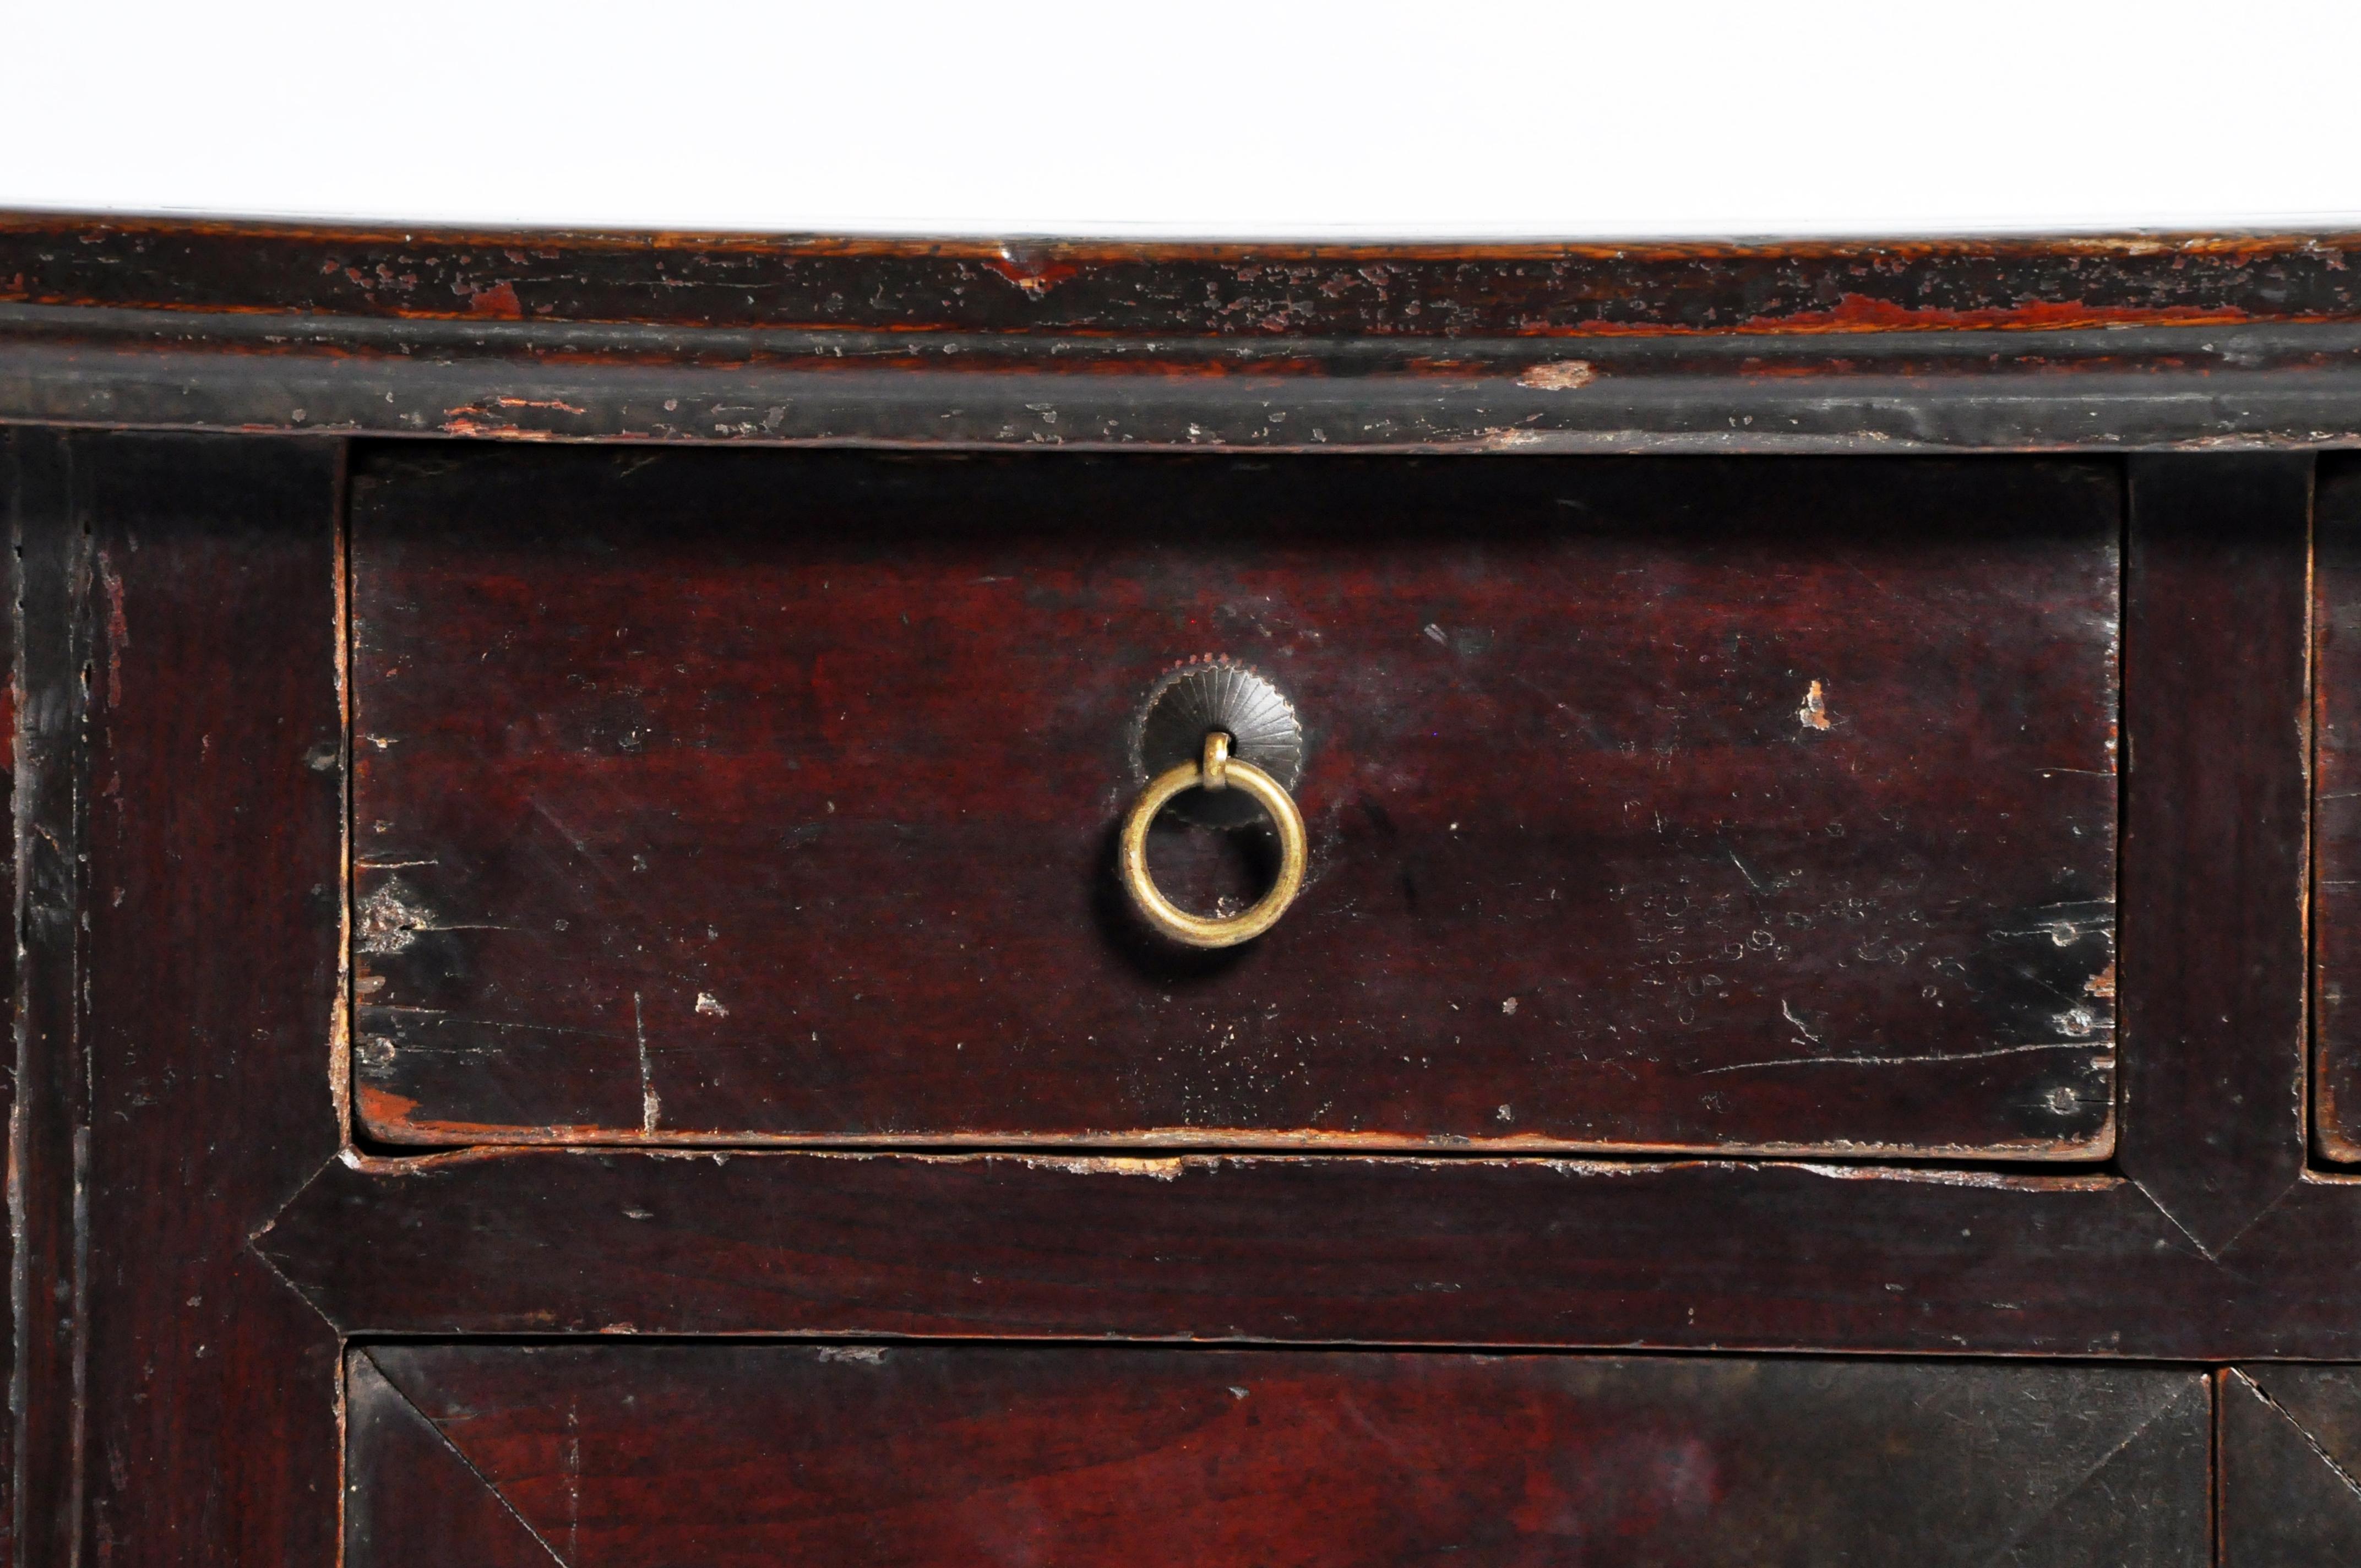 Qing Dynasty Chinese Butterfly Cabinet with Original Patina 10